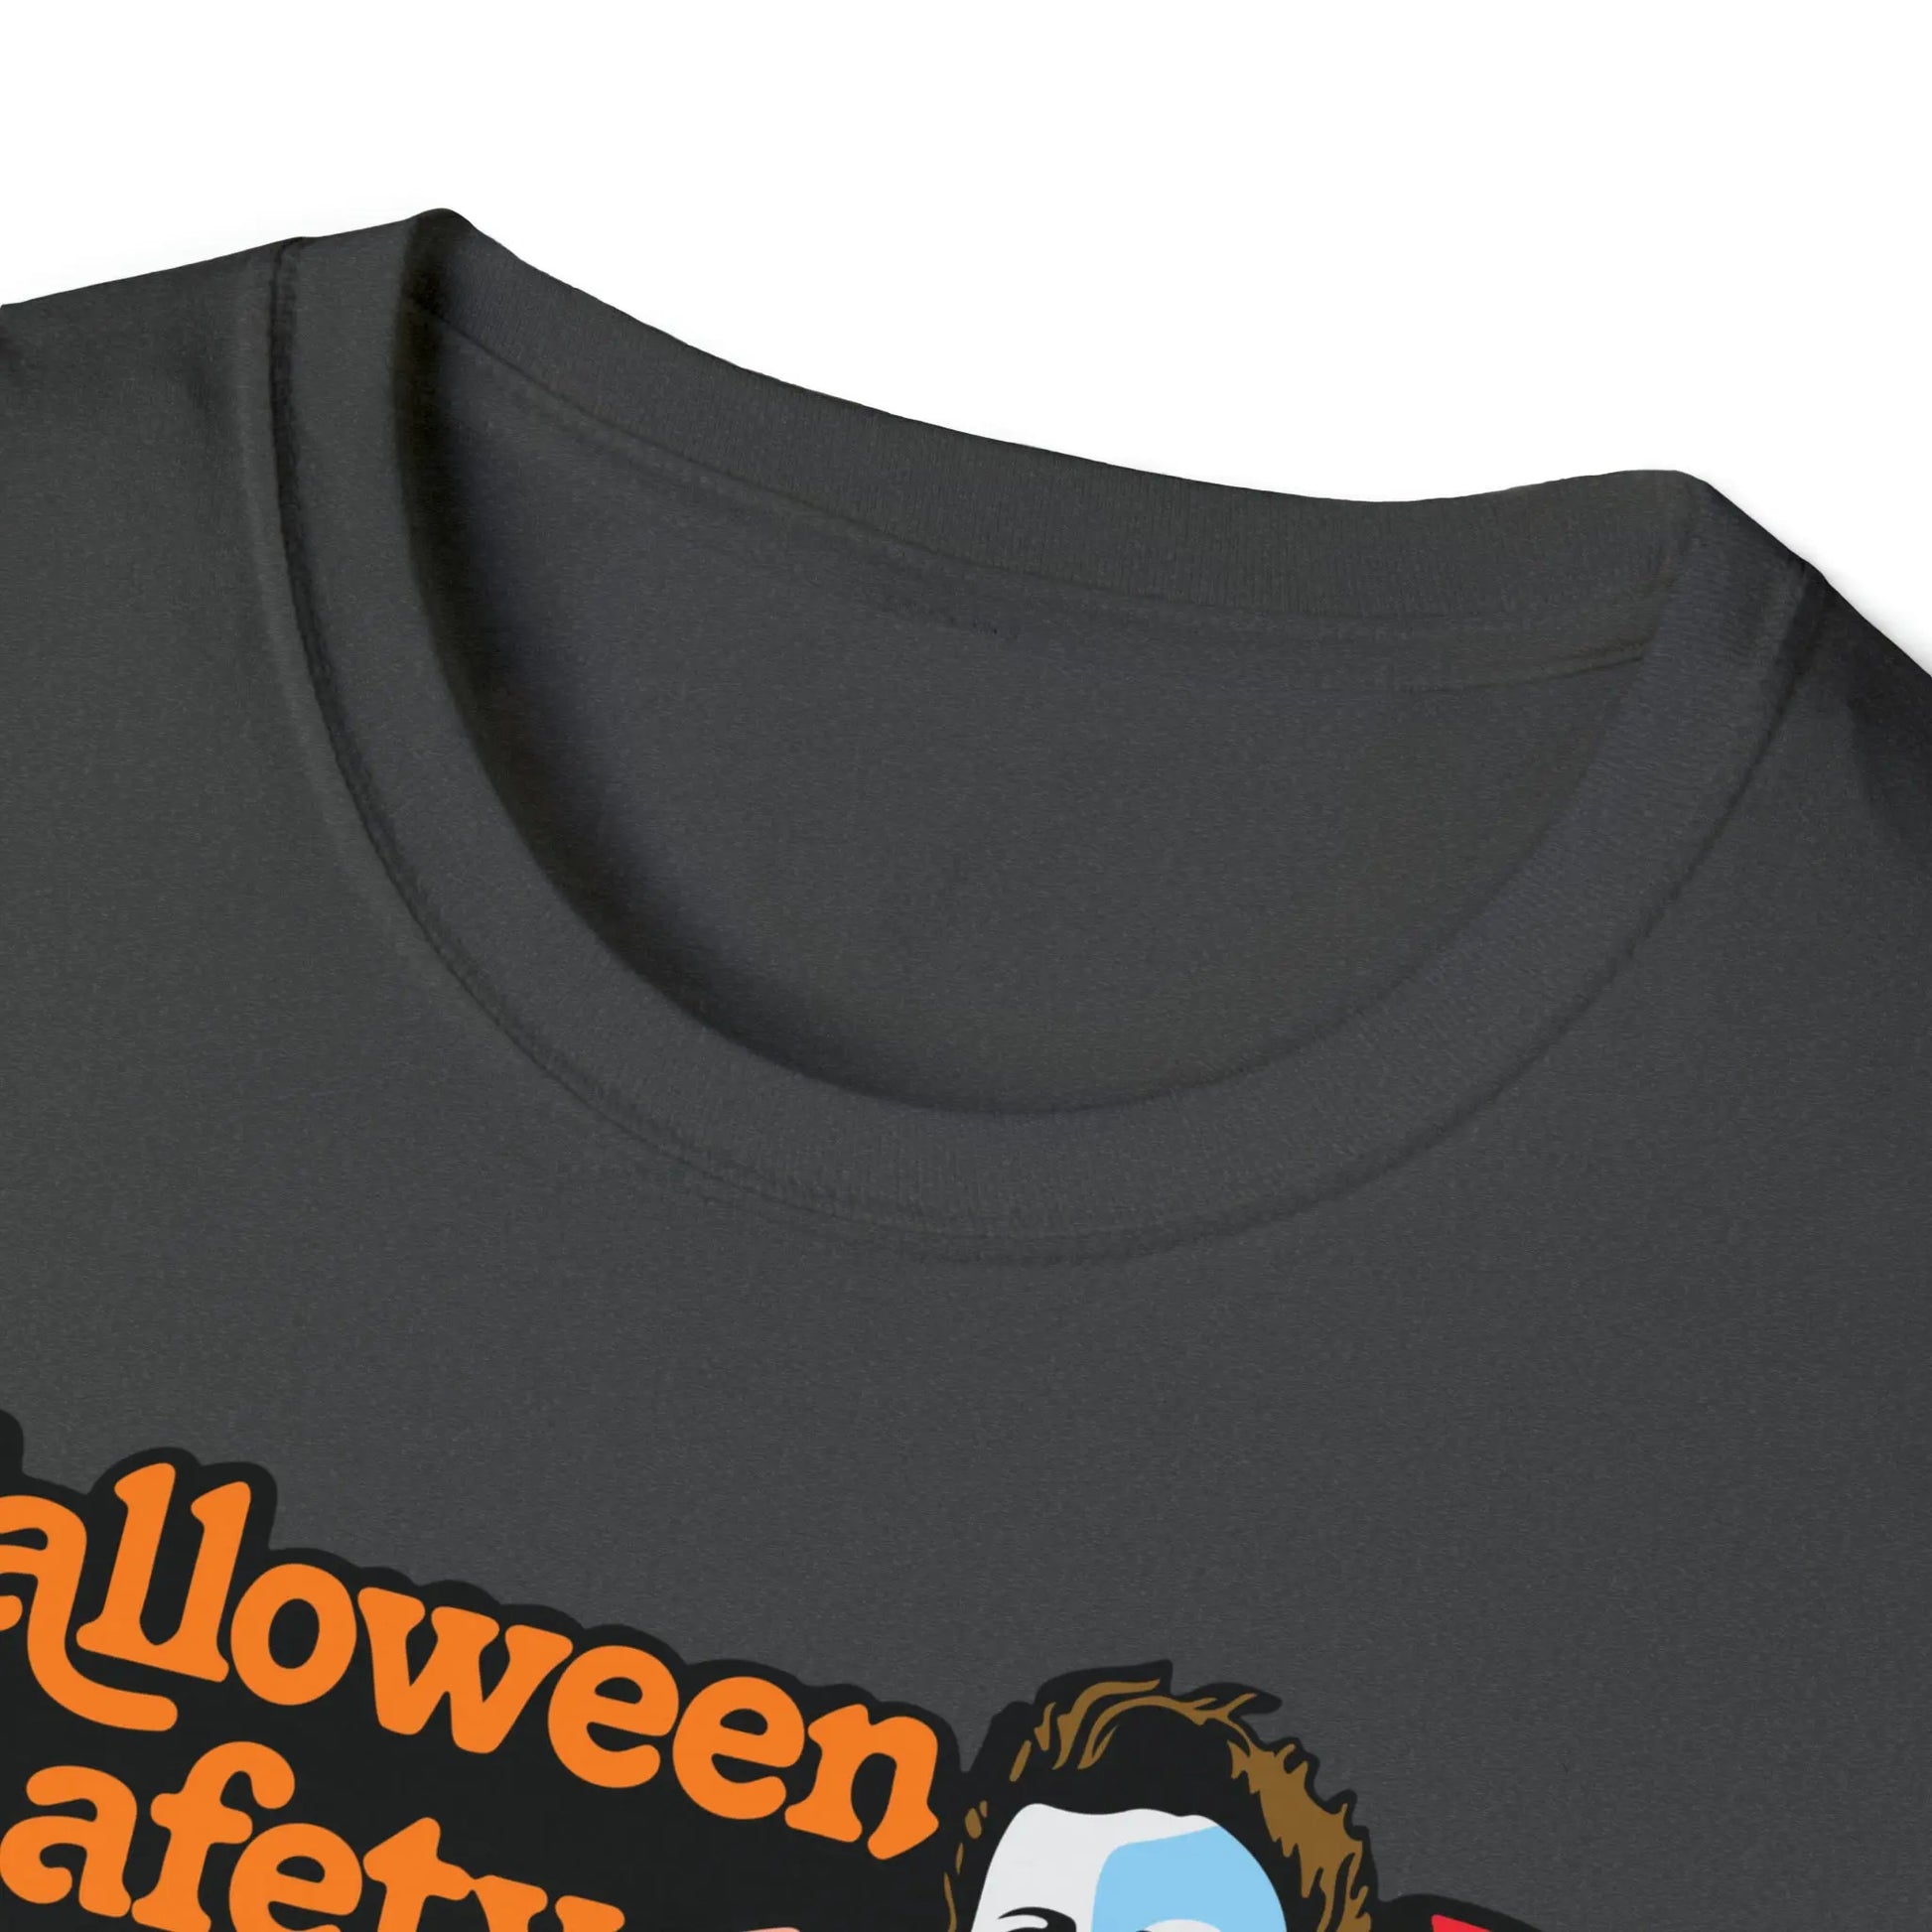 Michael Myers 'Halloween Safety Sitters Guide' Retro T Shirt - papercraneco